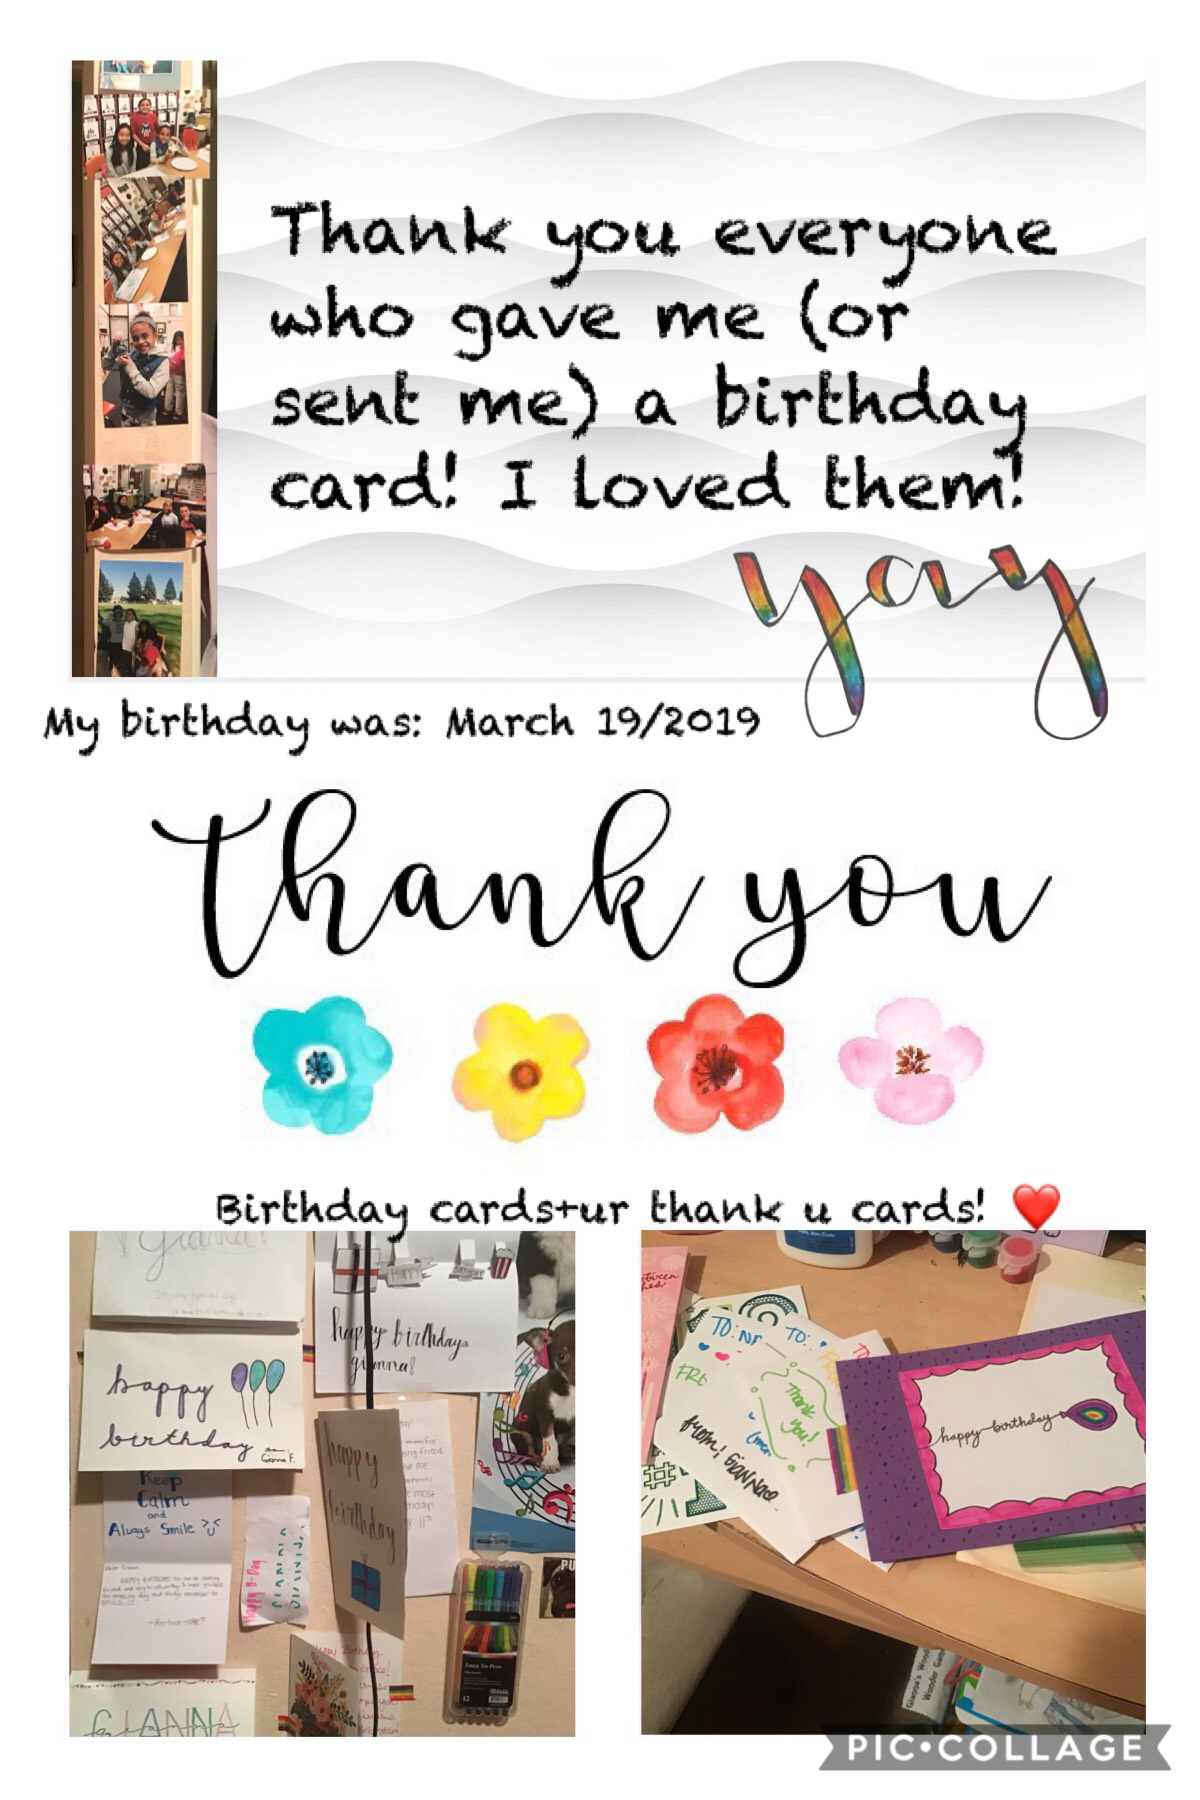 🎂Tap 🎂
Thank YOU EVERYONE WHO MADE MEH A BIRTHDAY CARD! I came to school that day and everyone came running towards me handing me gifts and cards ♥️😂I love my friends! Thank you! Even the people who sent me a birthday card! There were so many cards to rea